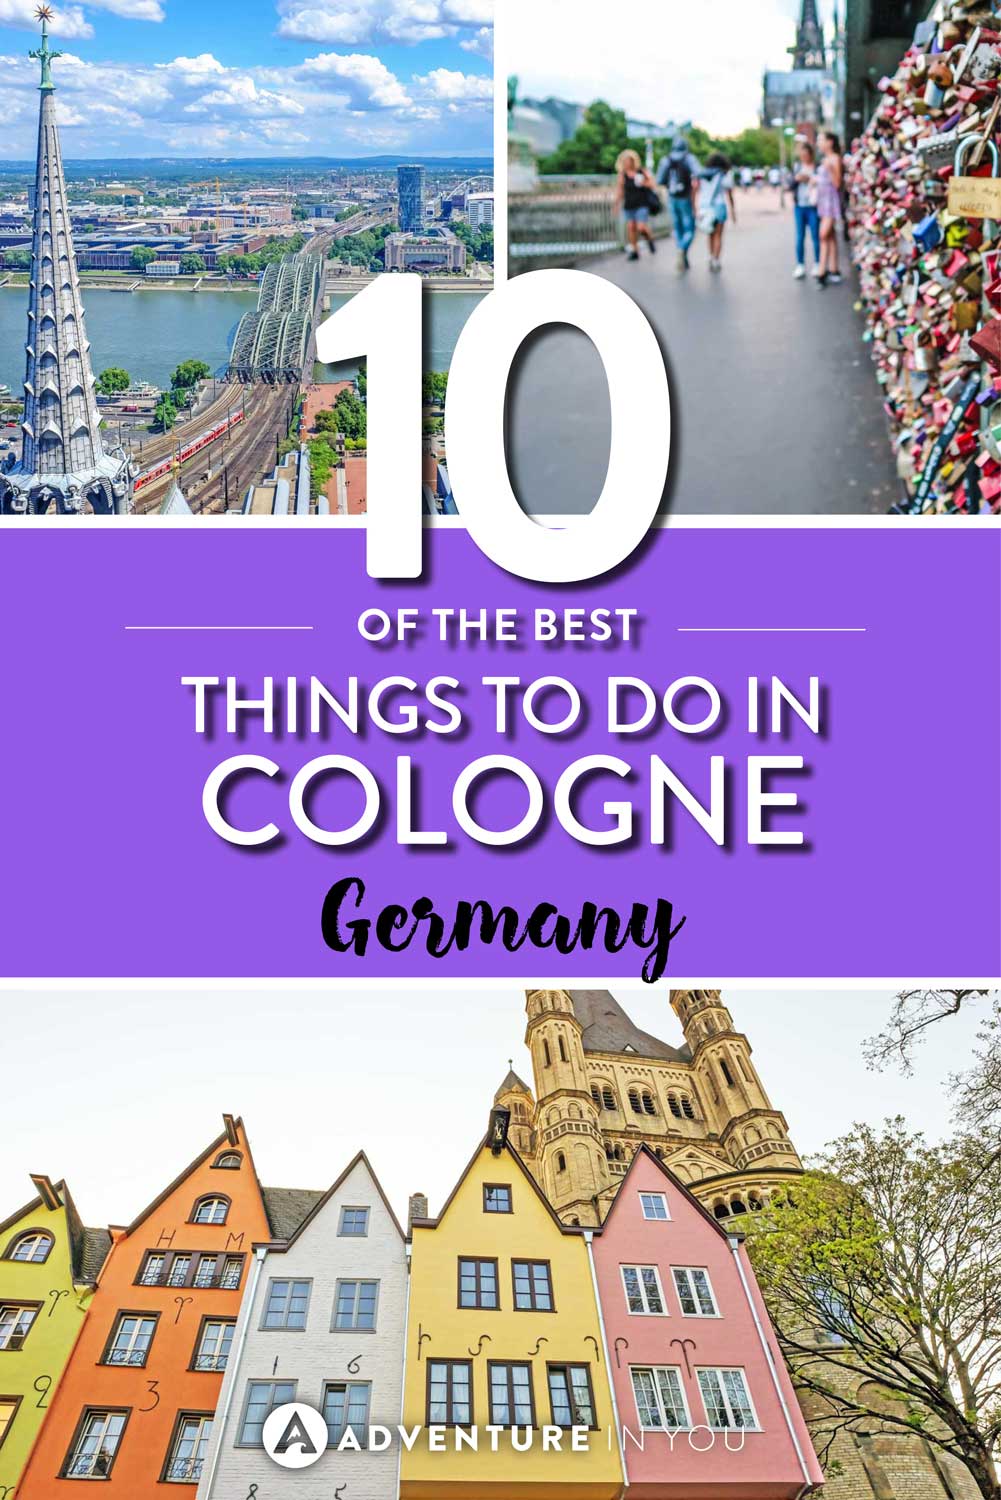 Cologne Germany | Looking to visit Cologne Germany? Check out my guide to seeing the best of this city. From beer breweries, chocolate factories, and popular buildings, Cologne has a lot to offer for tourists looking to explore.